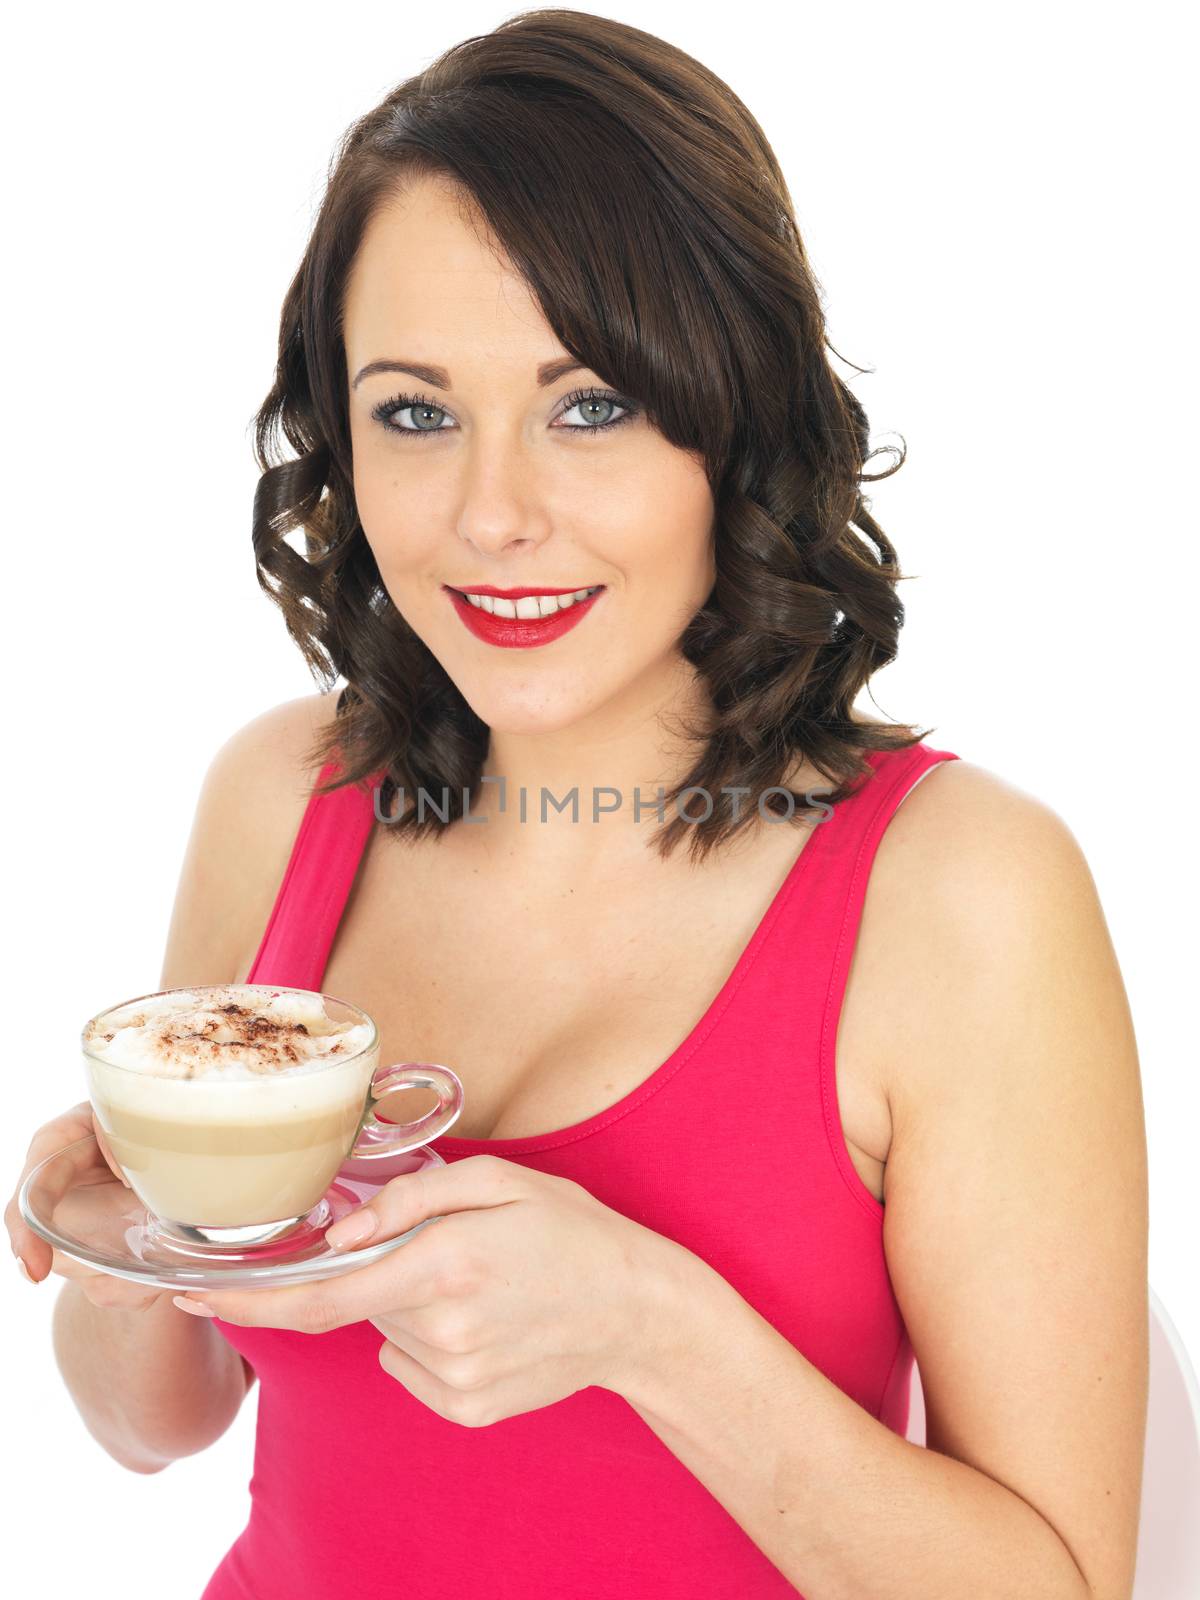 Young Woman Holding a Cup of Cappuccino Coffee by Whiteboxmedia